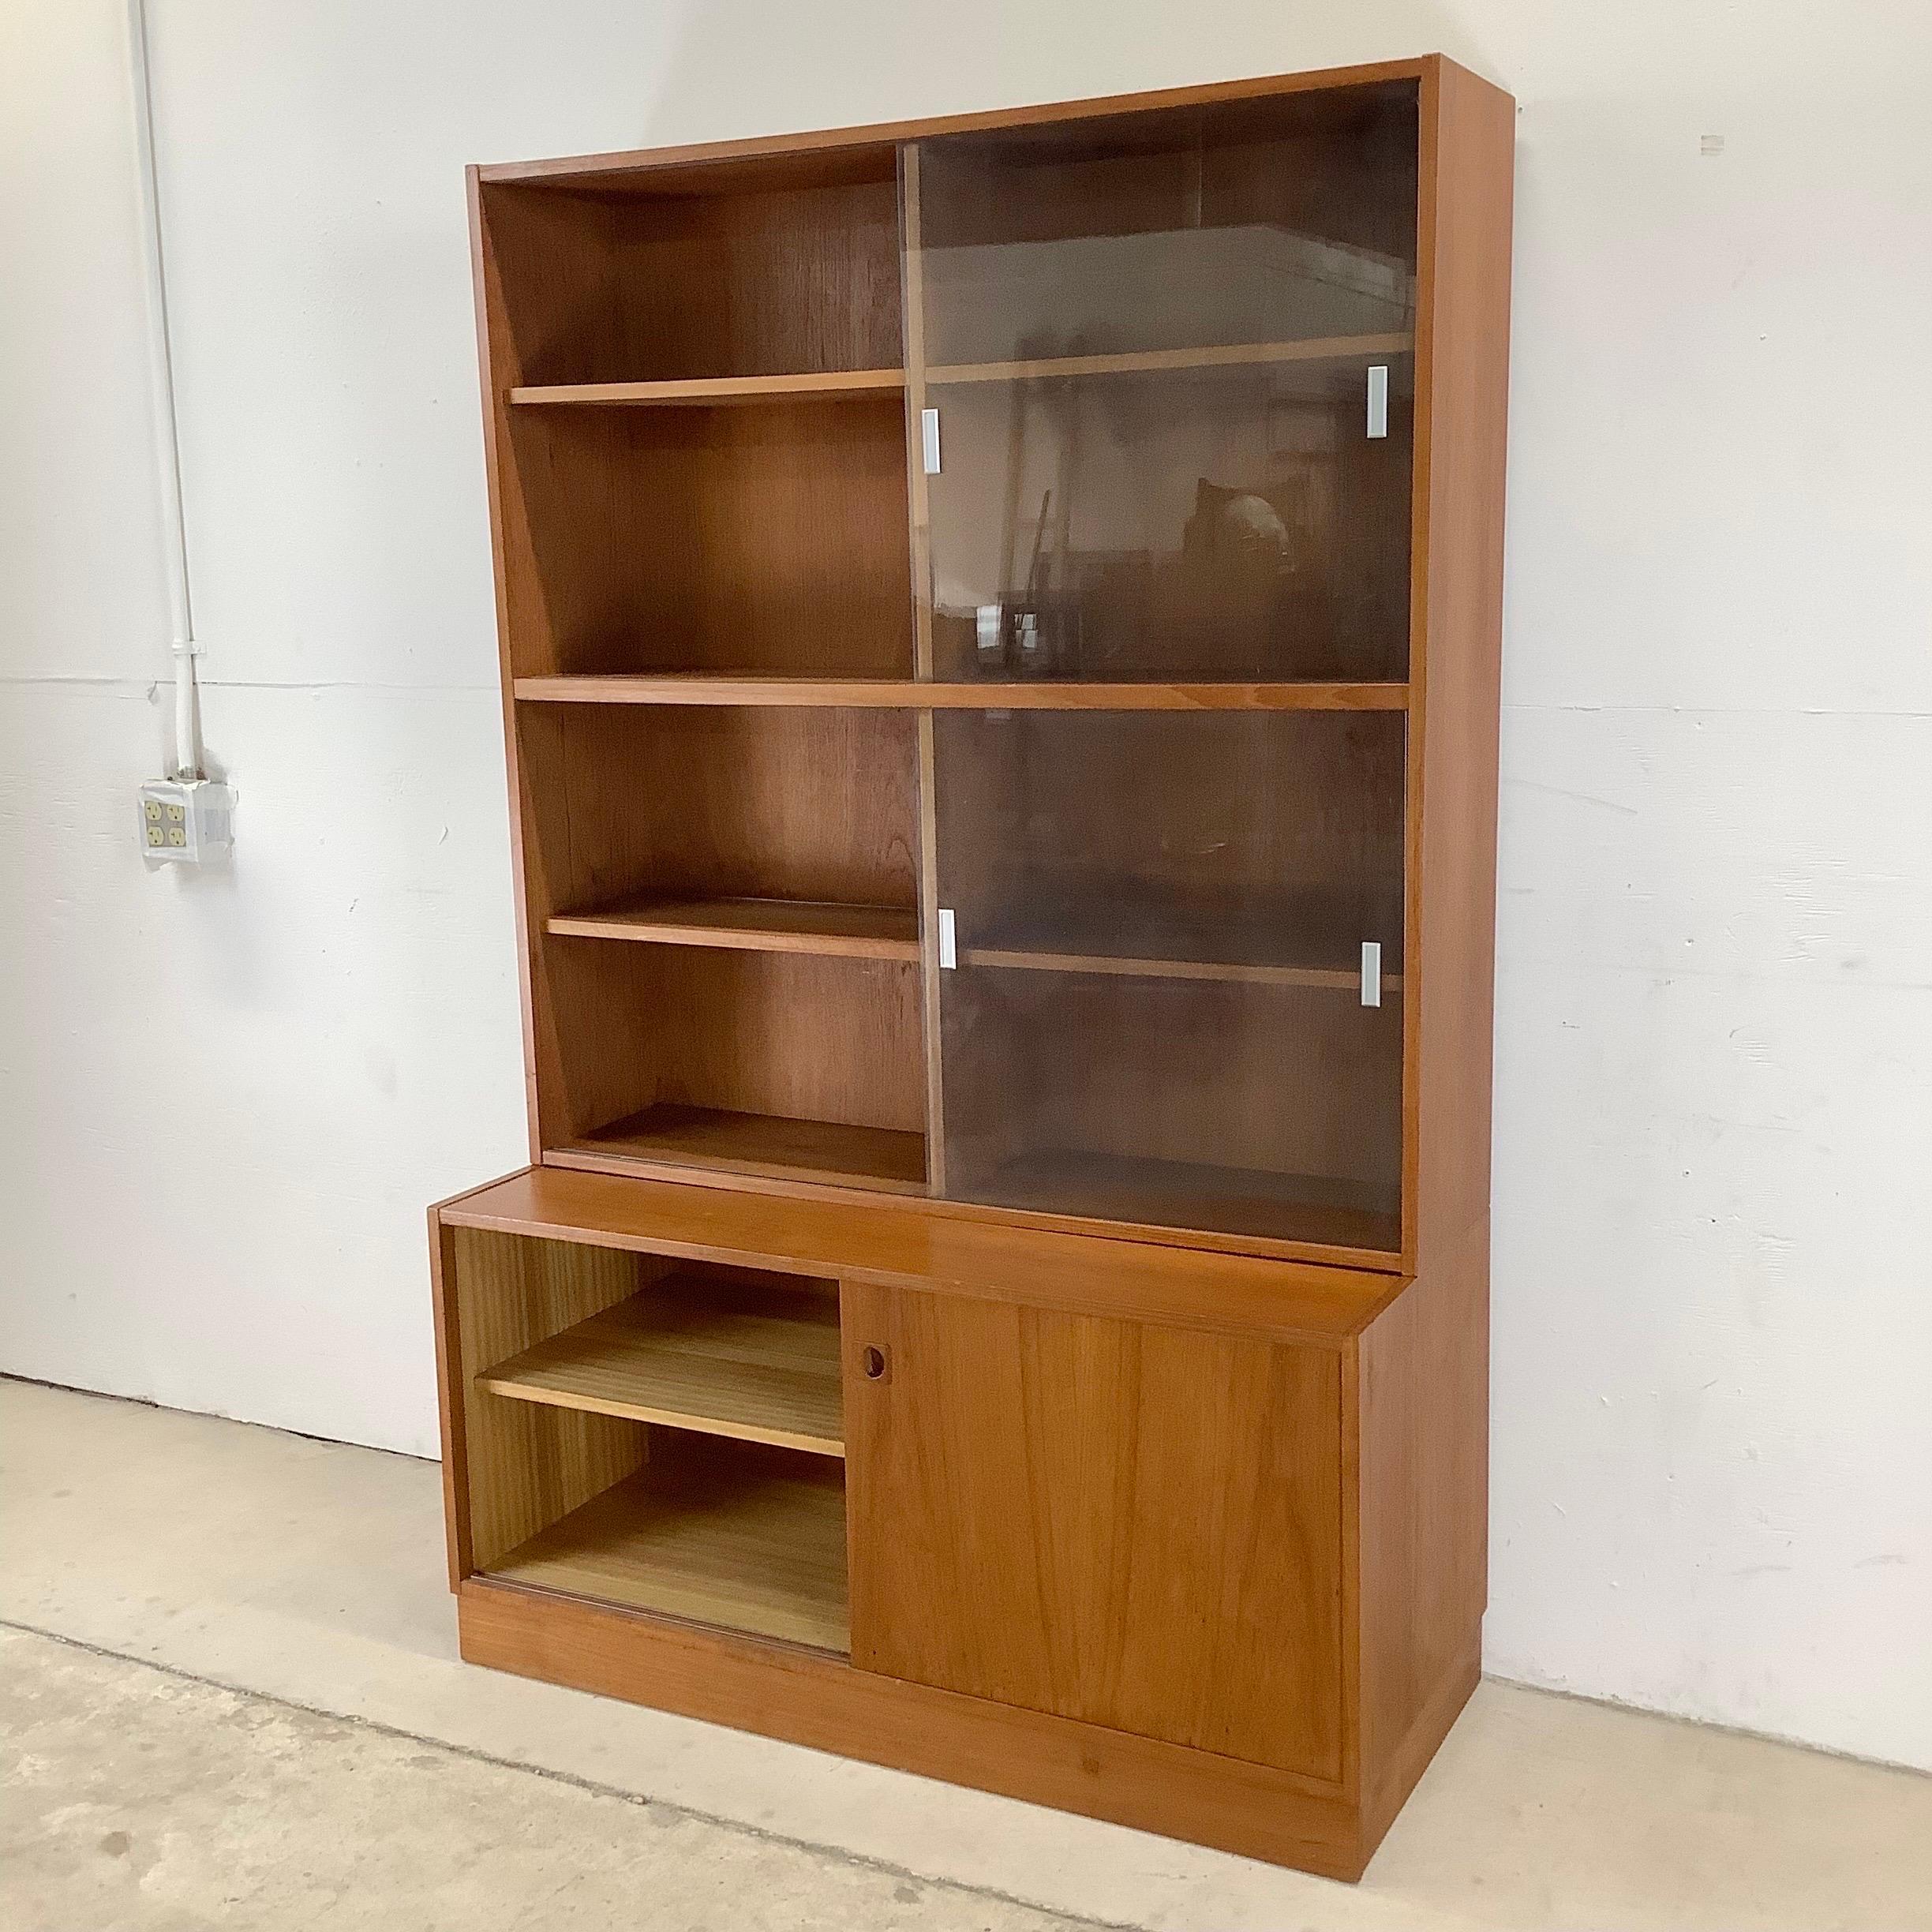 This substantial two piece teak bookcase features a sliding glass front display topper with adjustable shelves paired with a sliding teak door storage cabinet as a base. The two piece set offers the perfect mix of showroom style display with lower